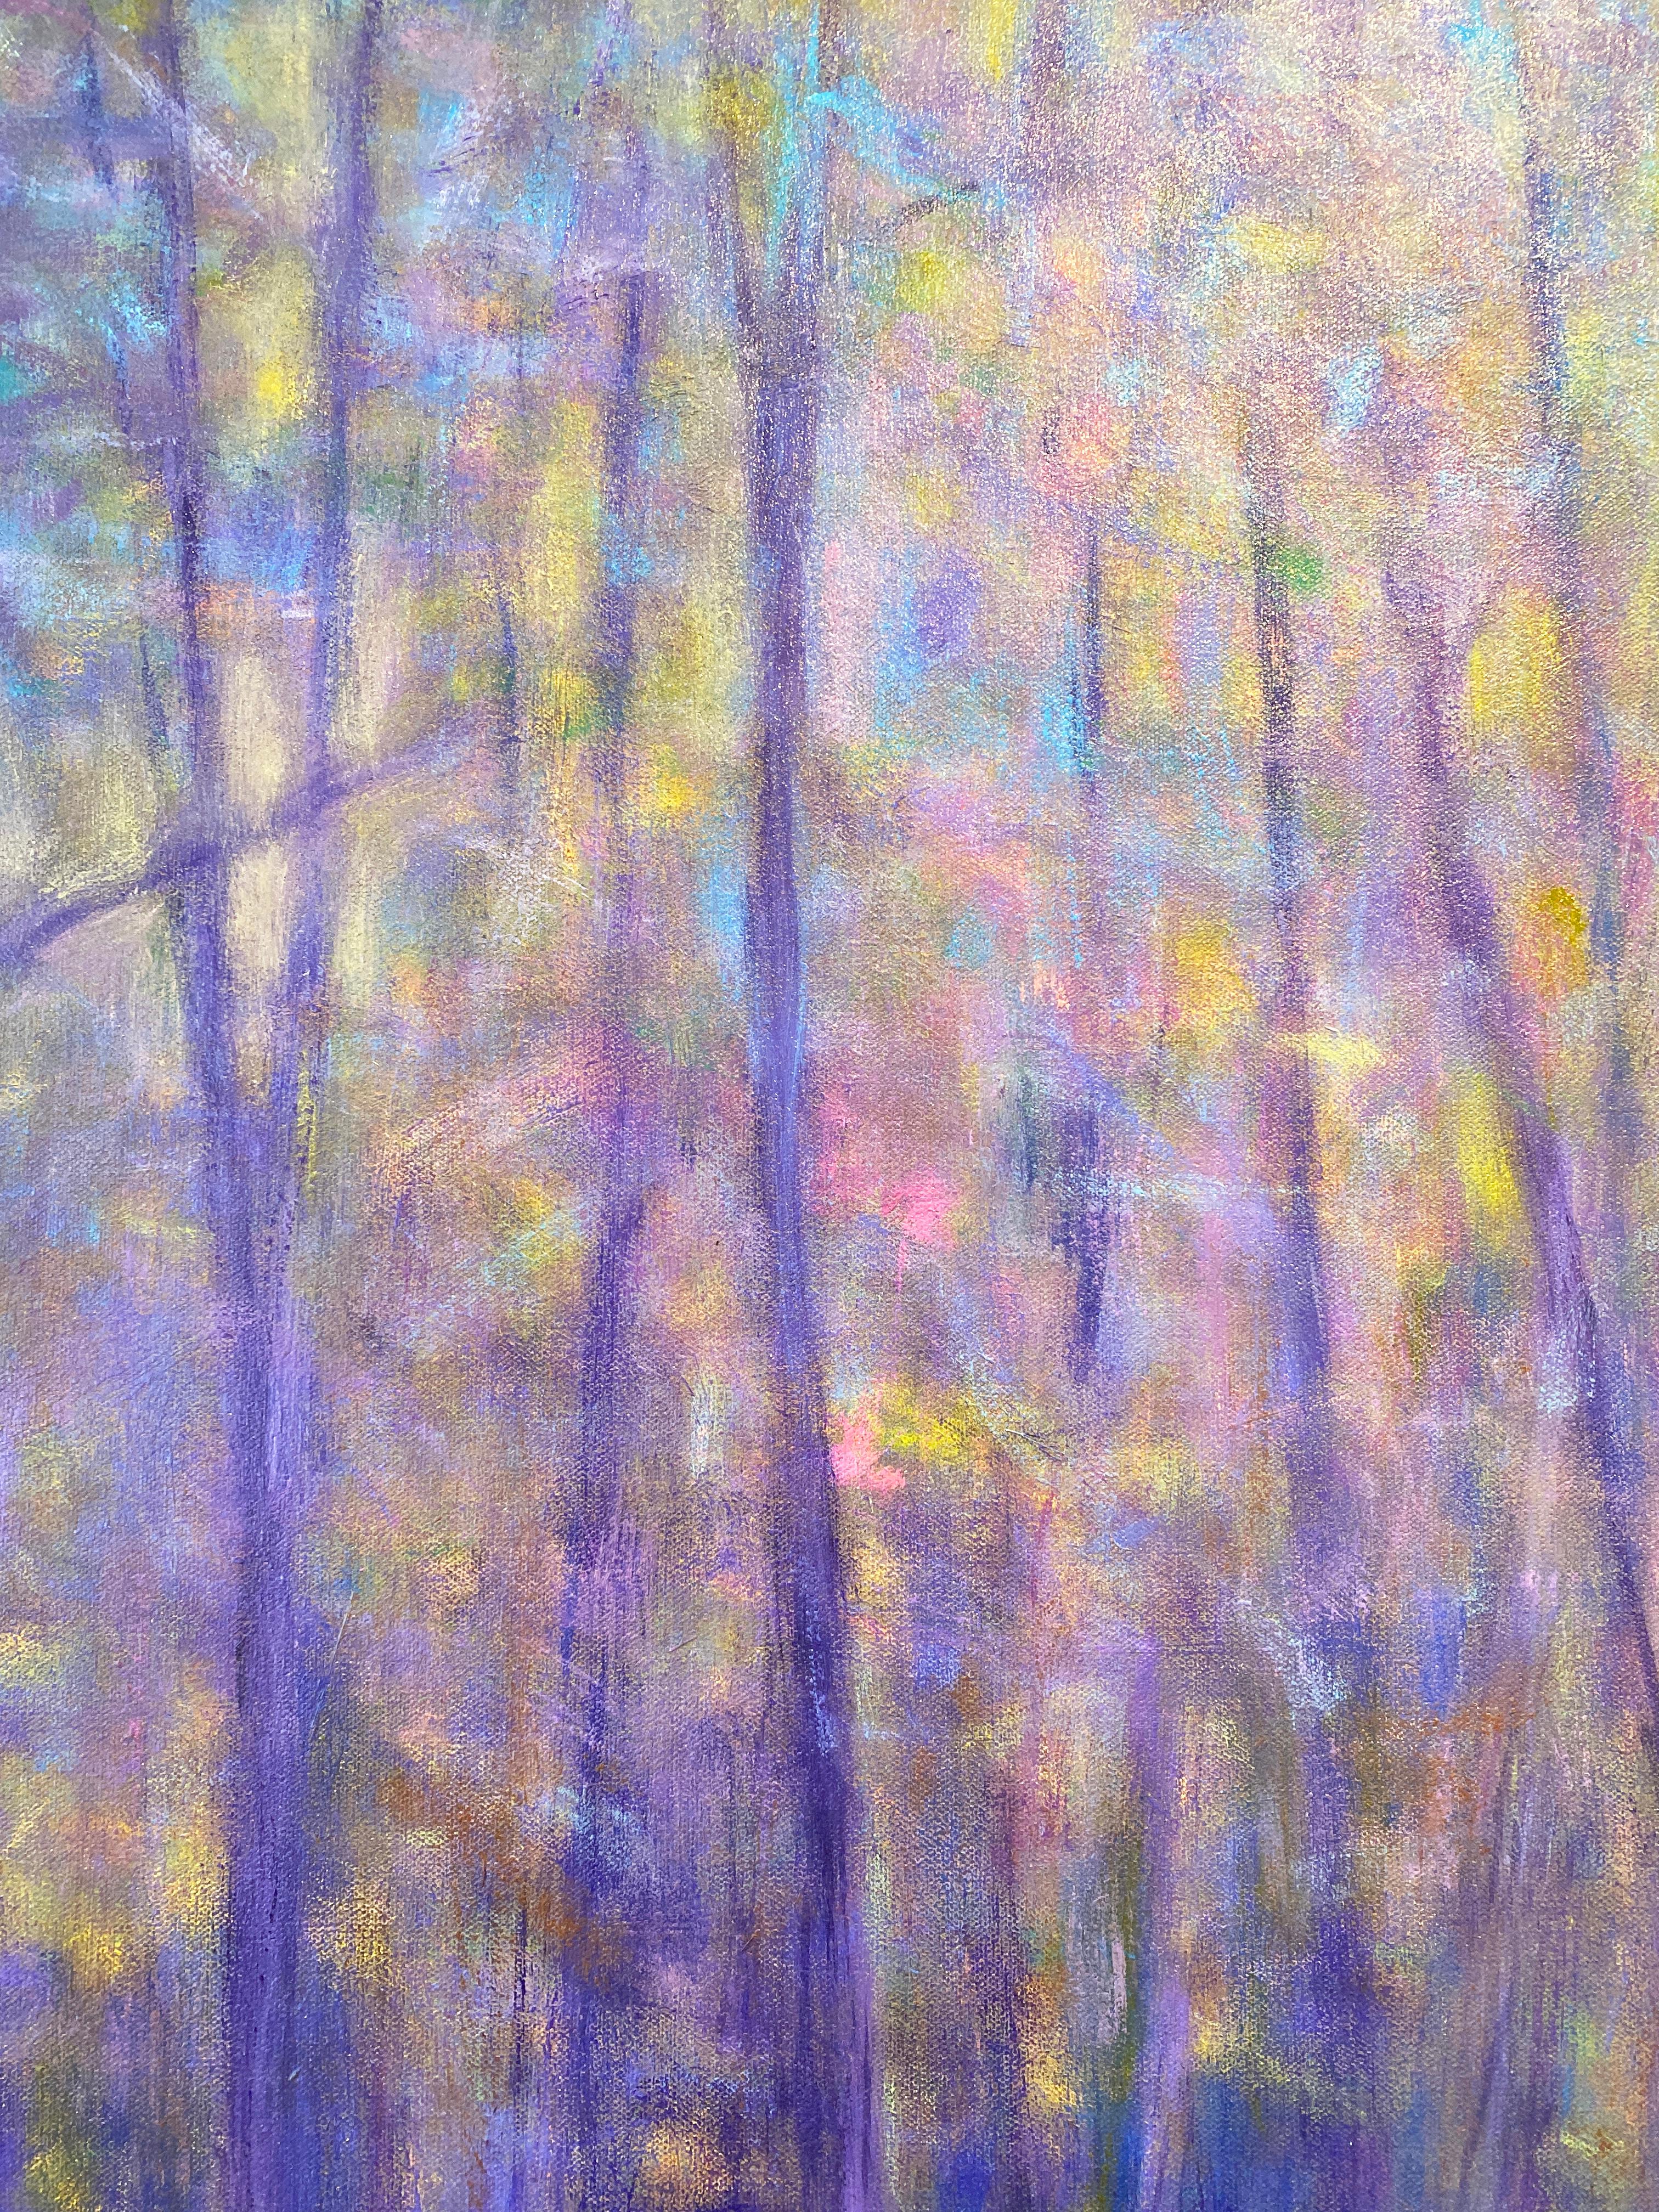 'Diffused Forest' 2022 by American artist, Ken Elliott. Oil on canvas, 40 x 60 in. A serene picture of a forest and meadow. Painted in an expressionistic style, the rich colors of purples and greens blend beautifully with the hints of blues and